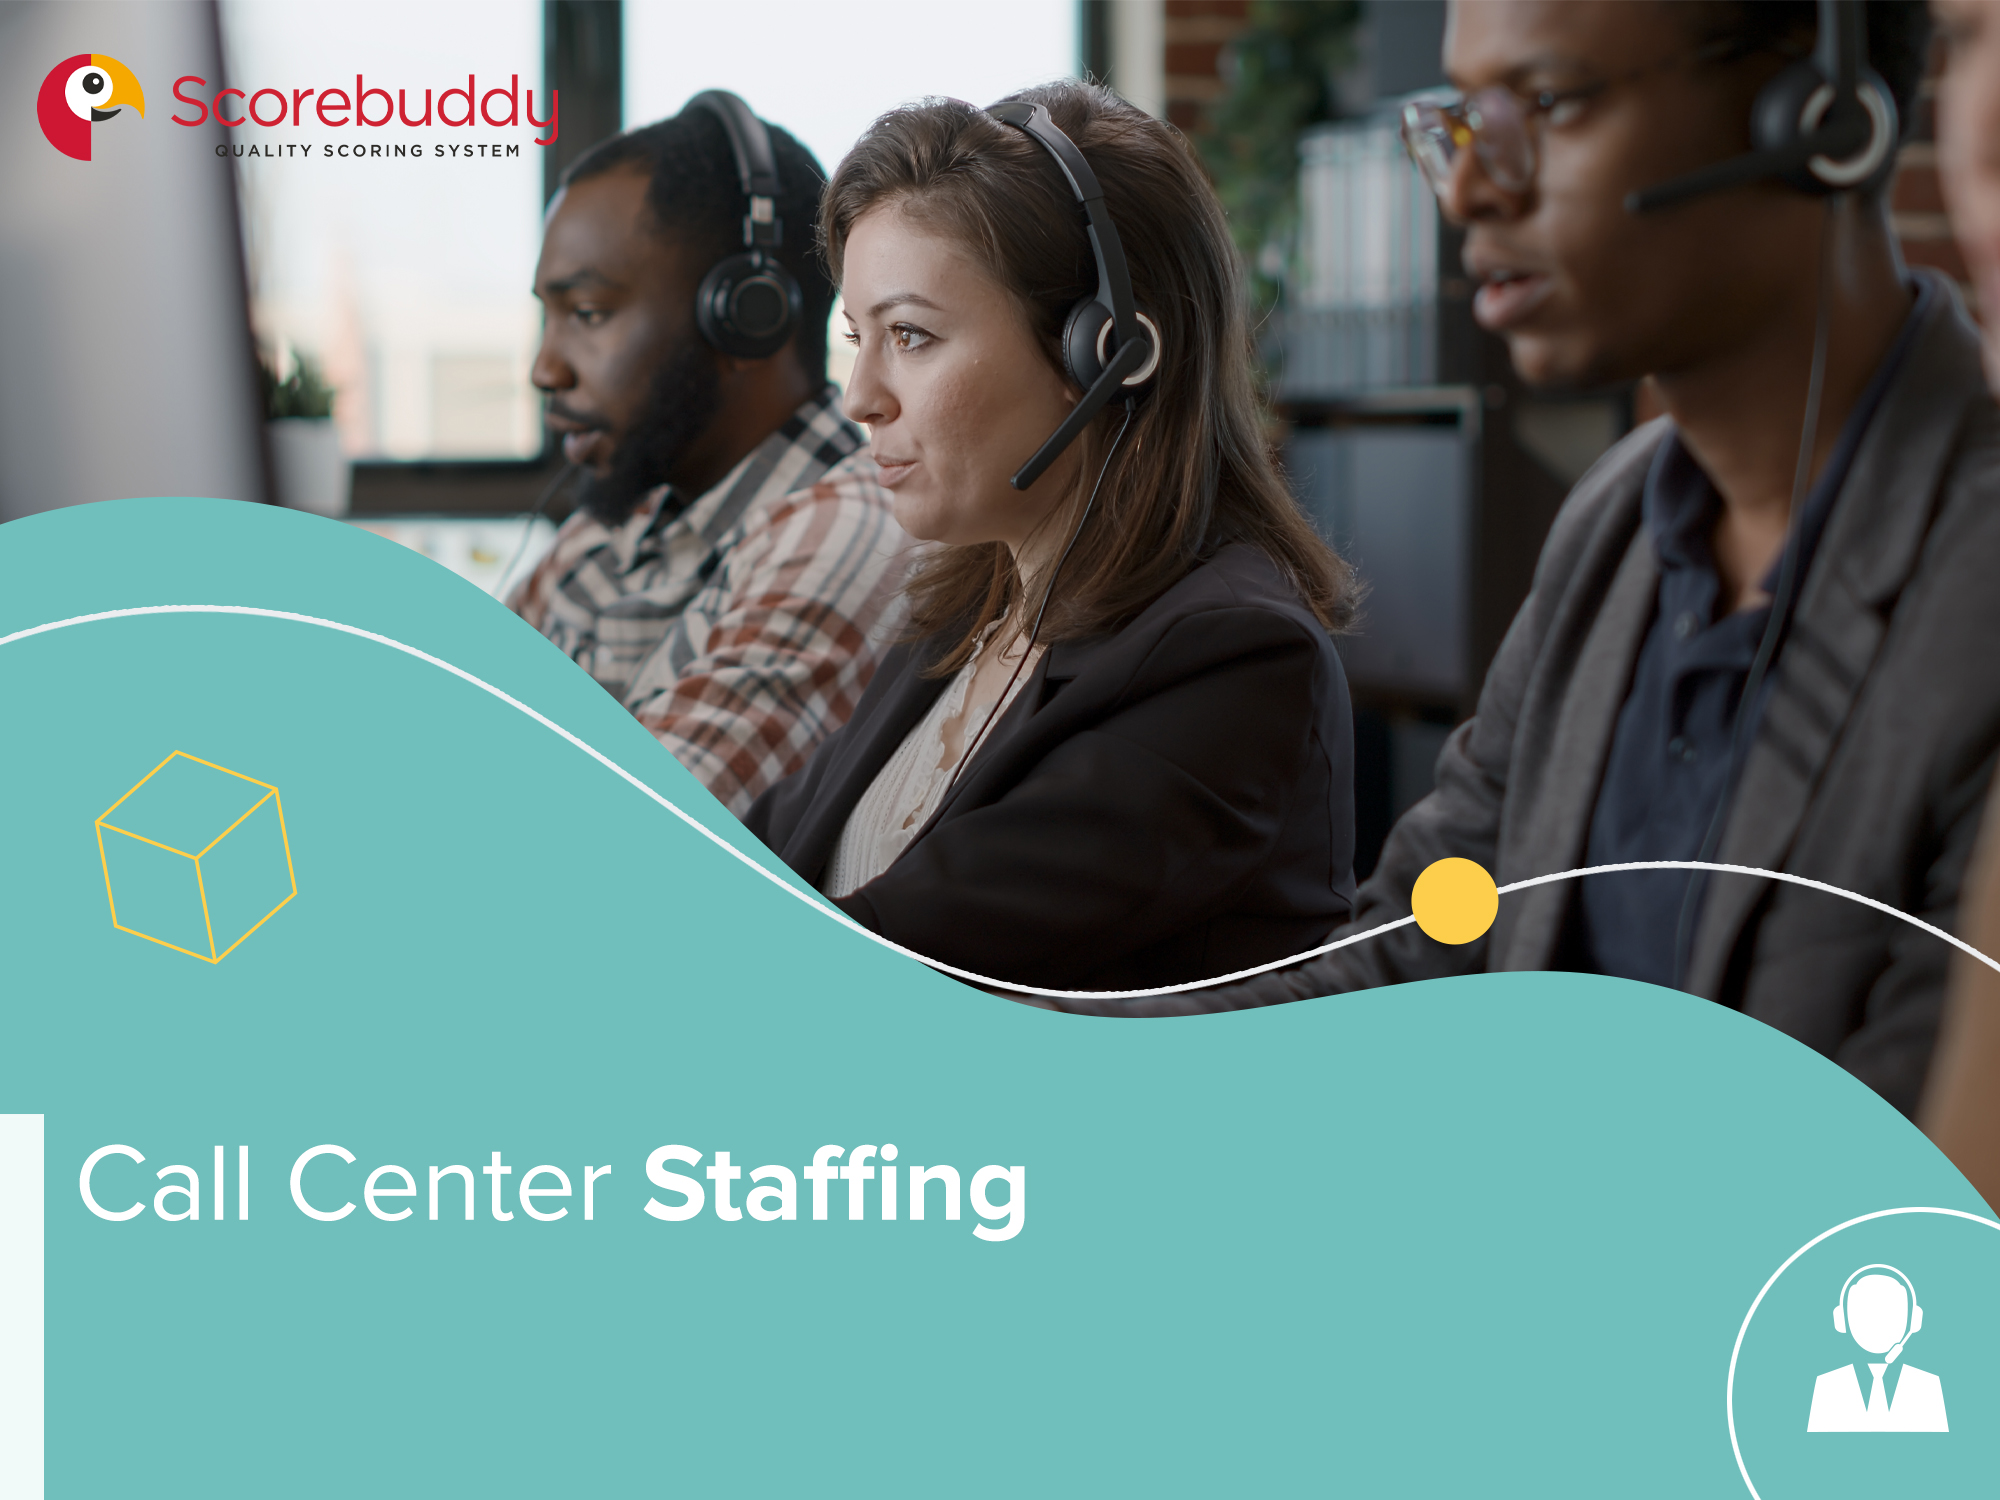 The Complete Guide on Call Center Staffing